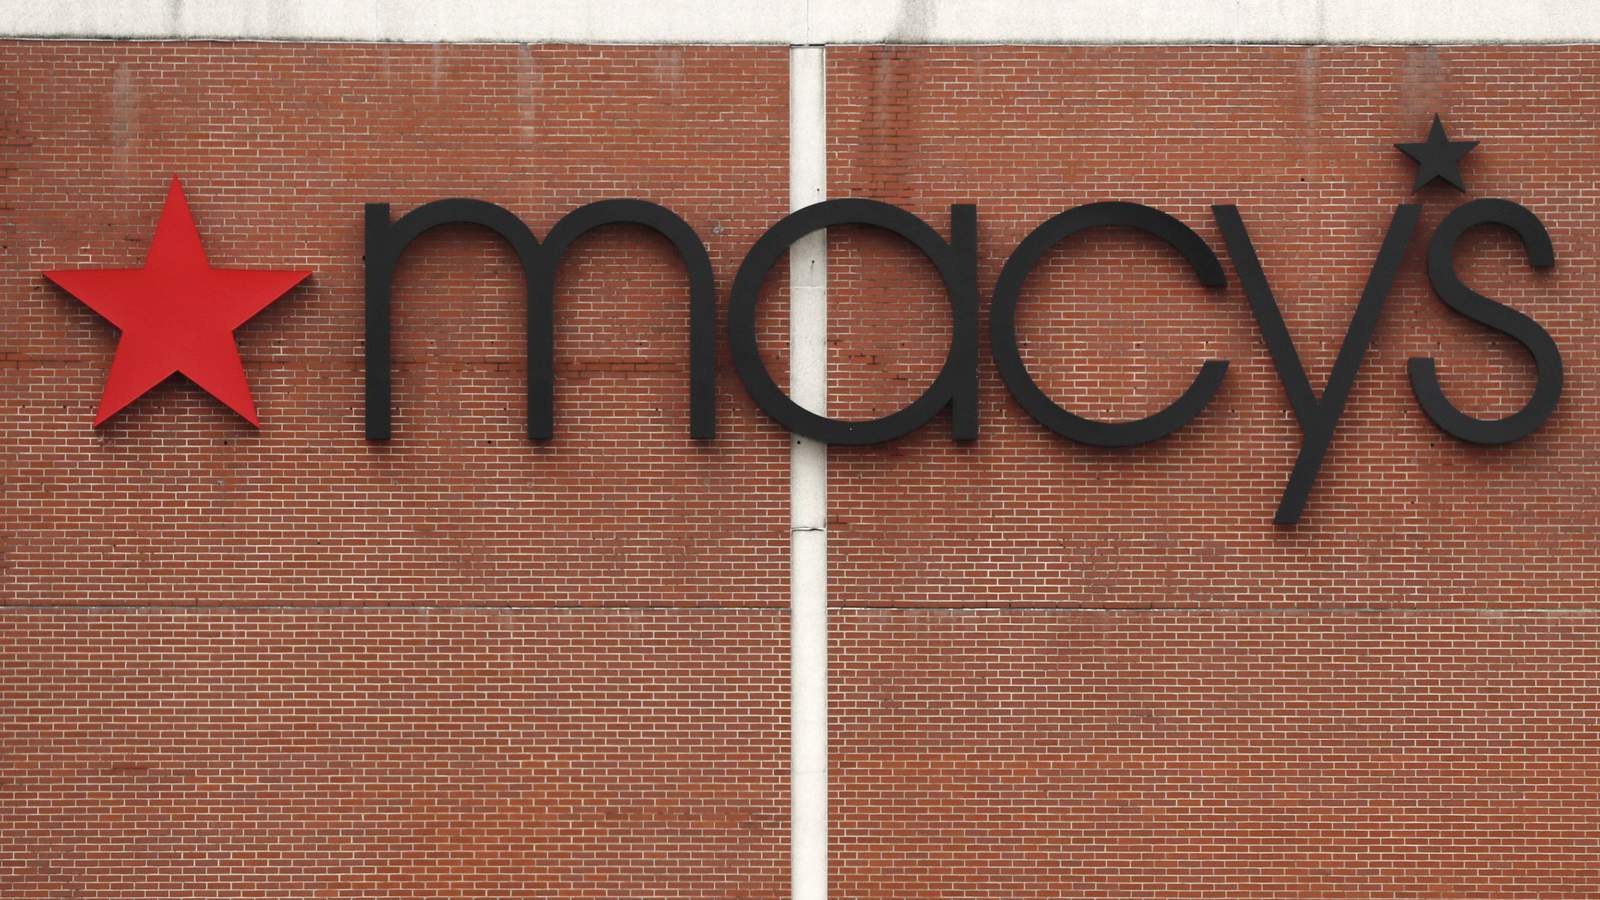 Macys stores in Metro Detroit open for in-store shopping, curbside delivery and pick-up